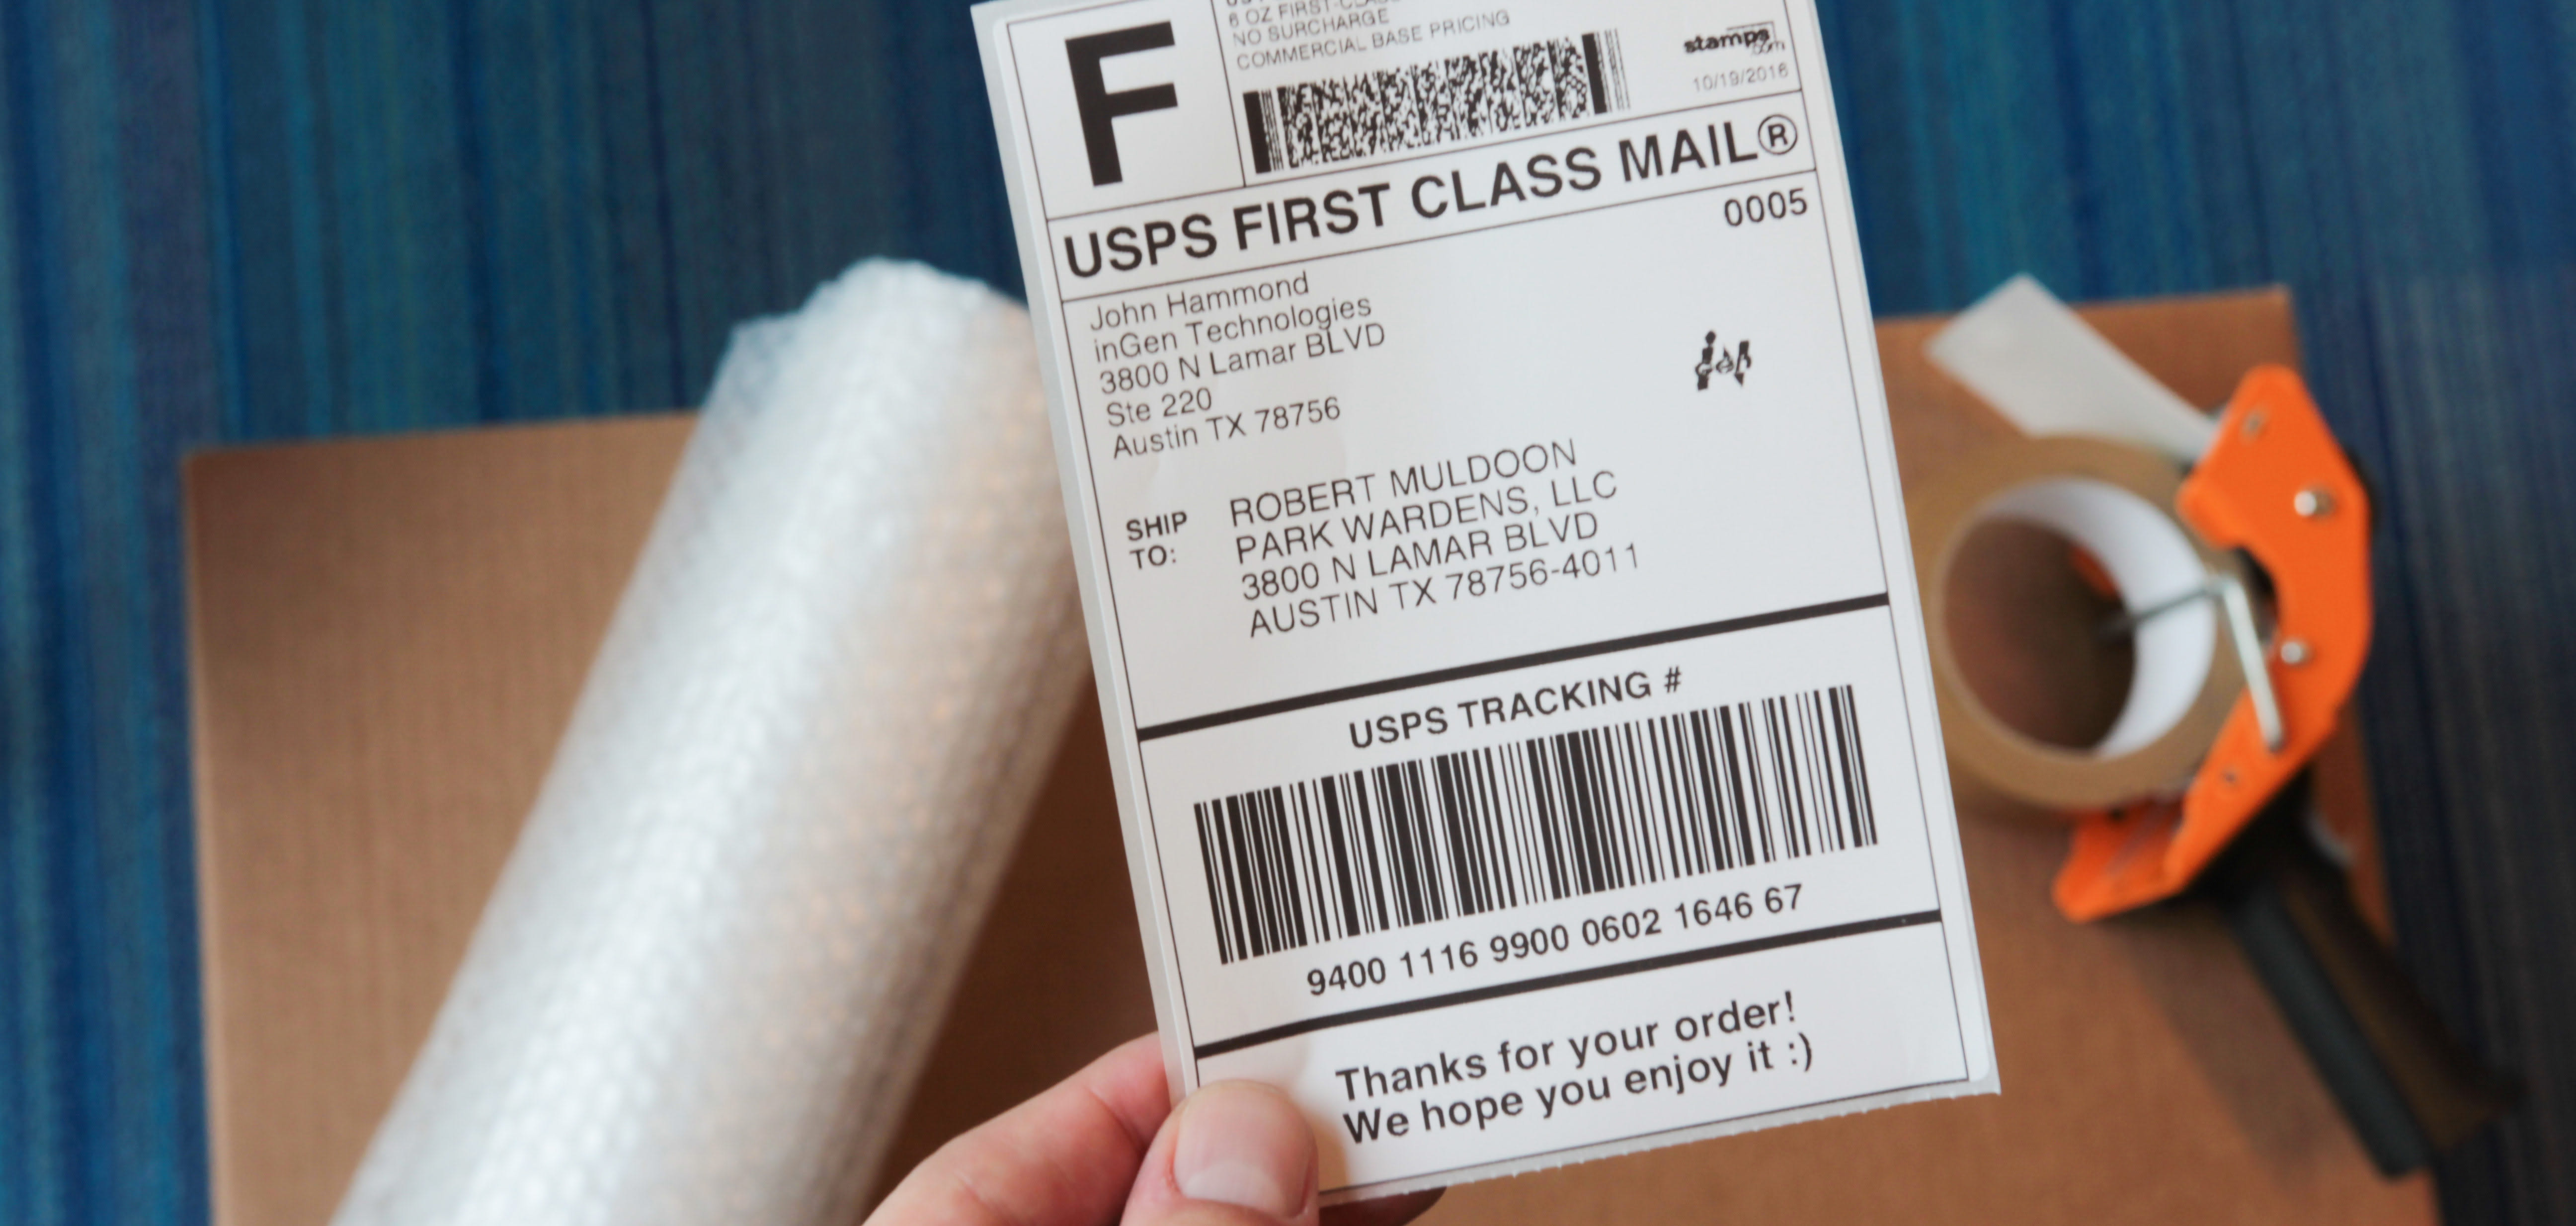 Provide you with a shipping label to mail your package ups label Intended For Ups Shipping Label Template